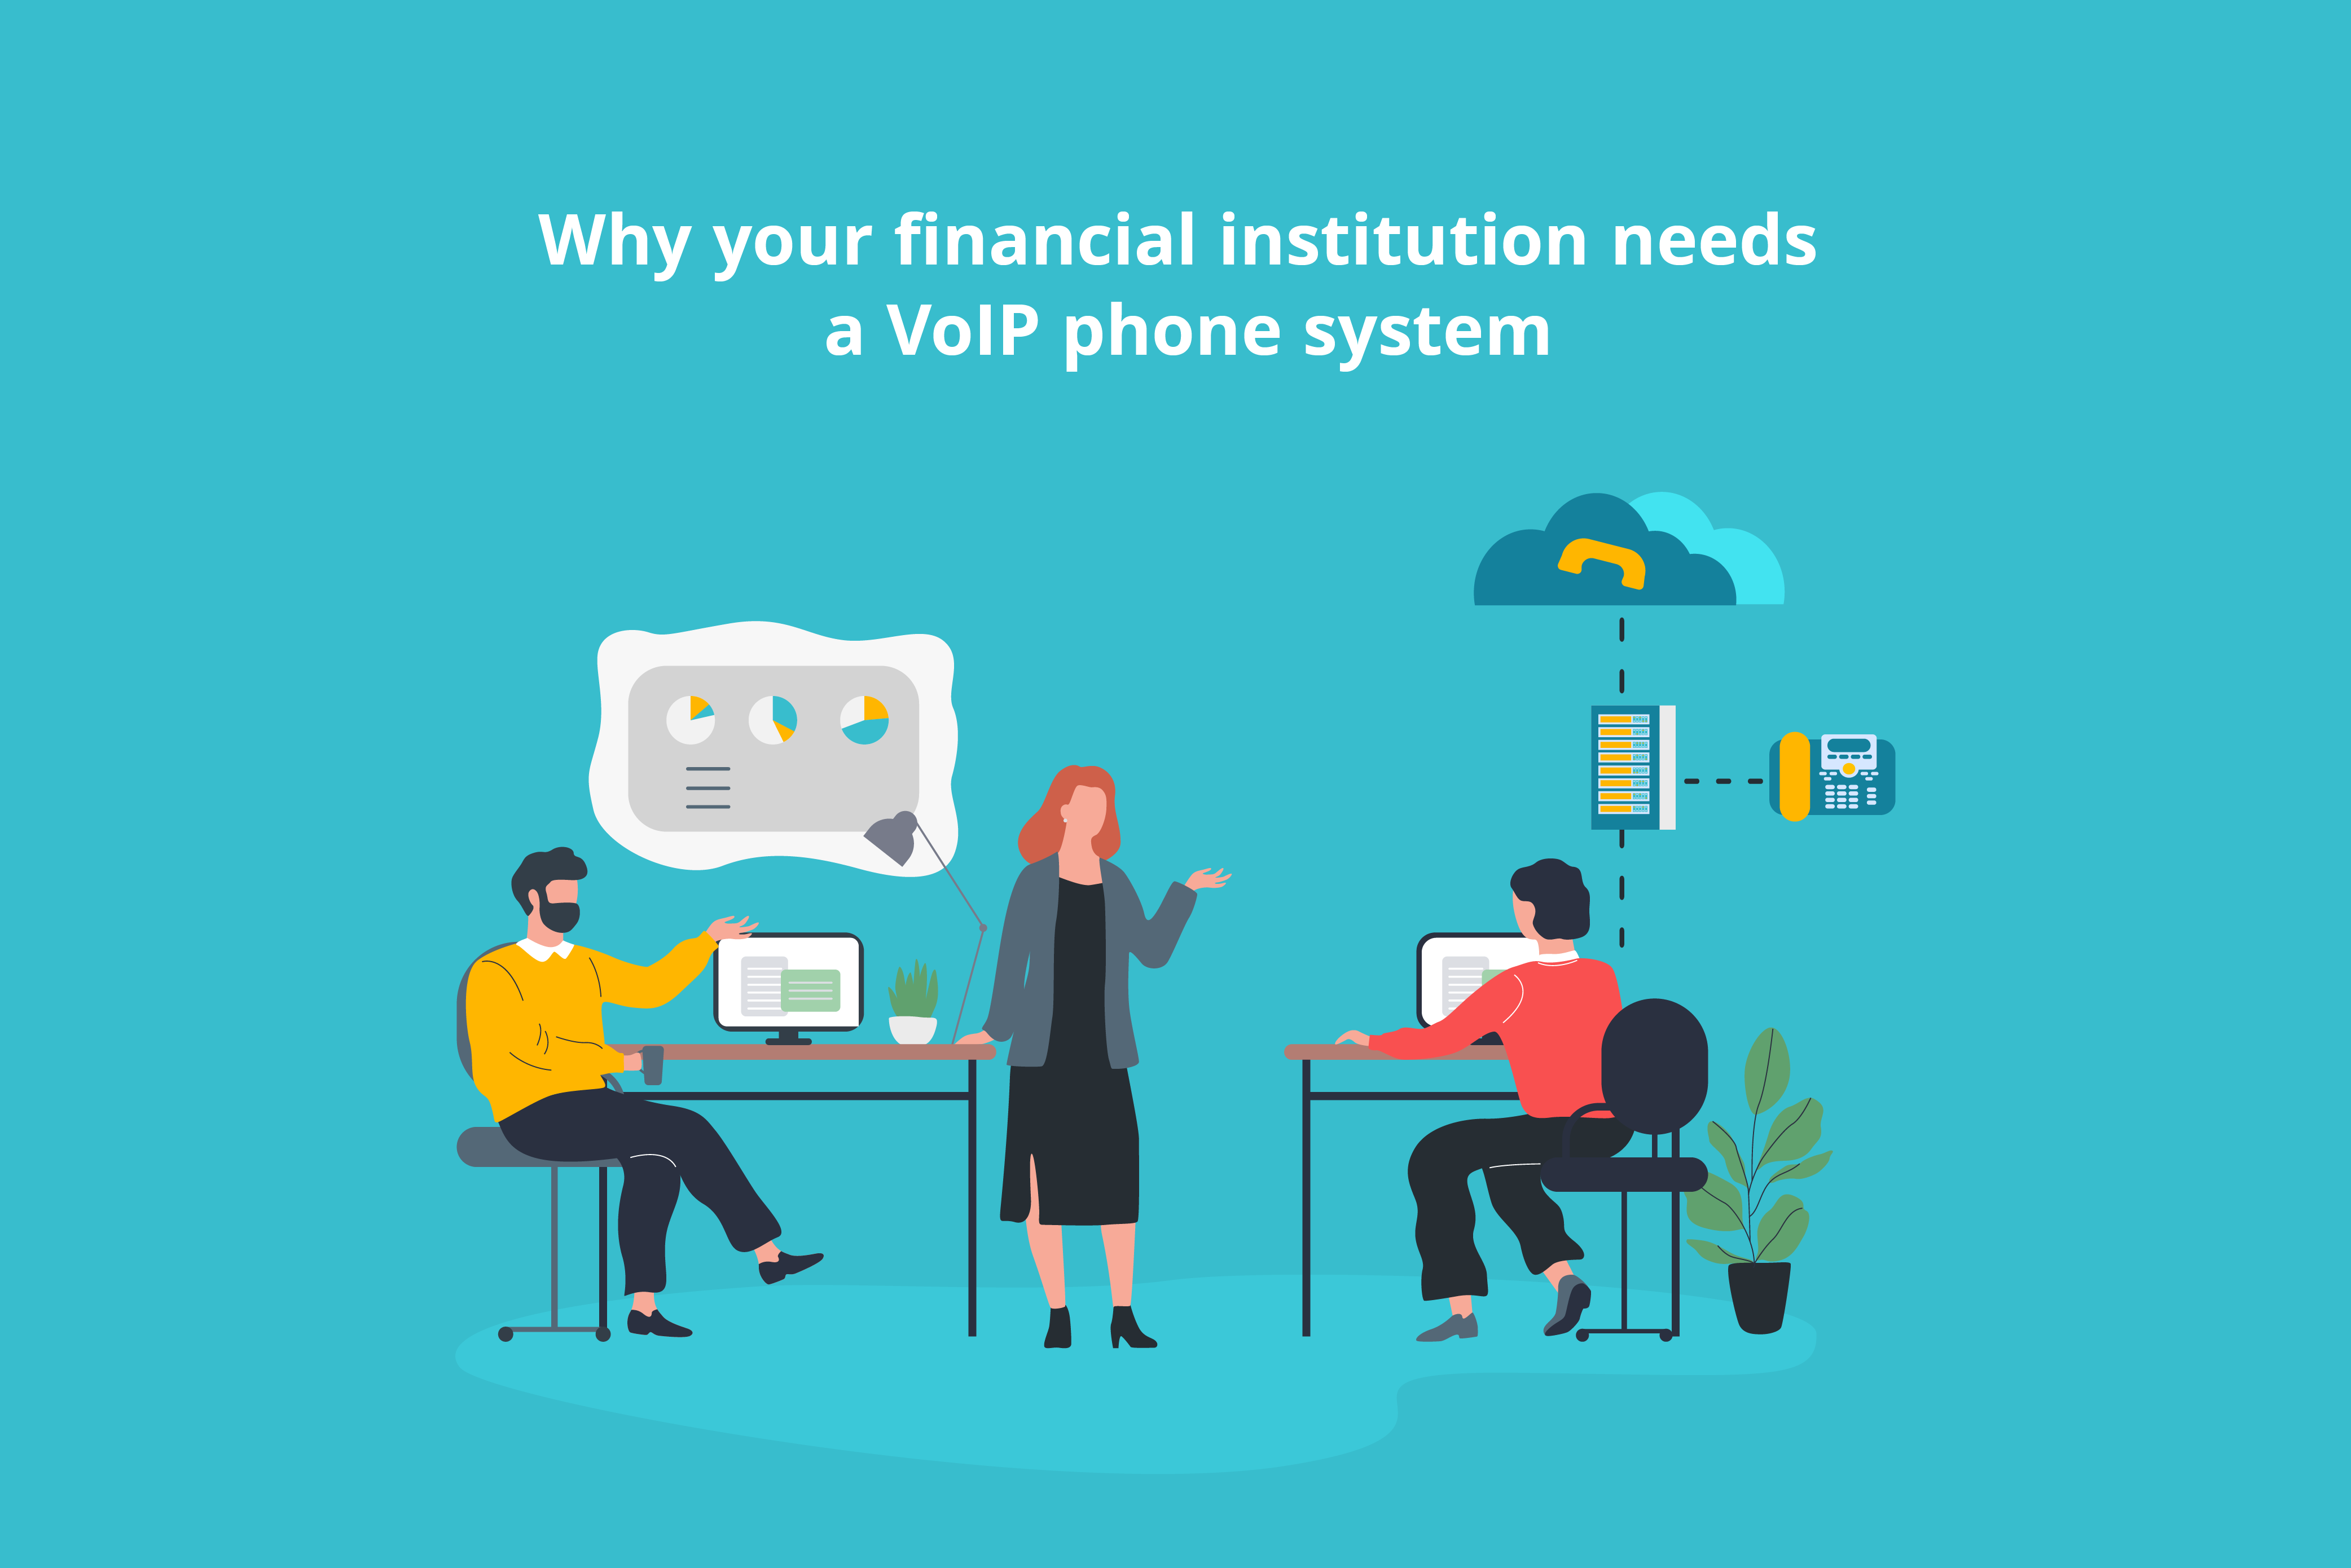 Finance office using a VoIP phone system to communicate.